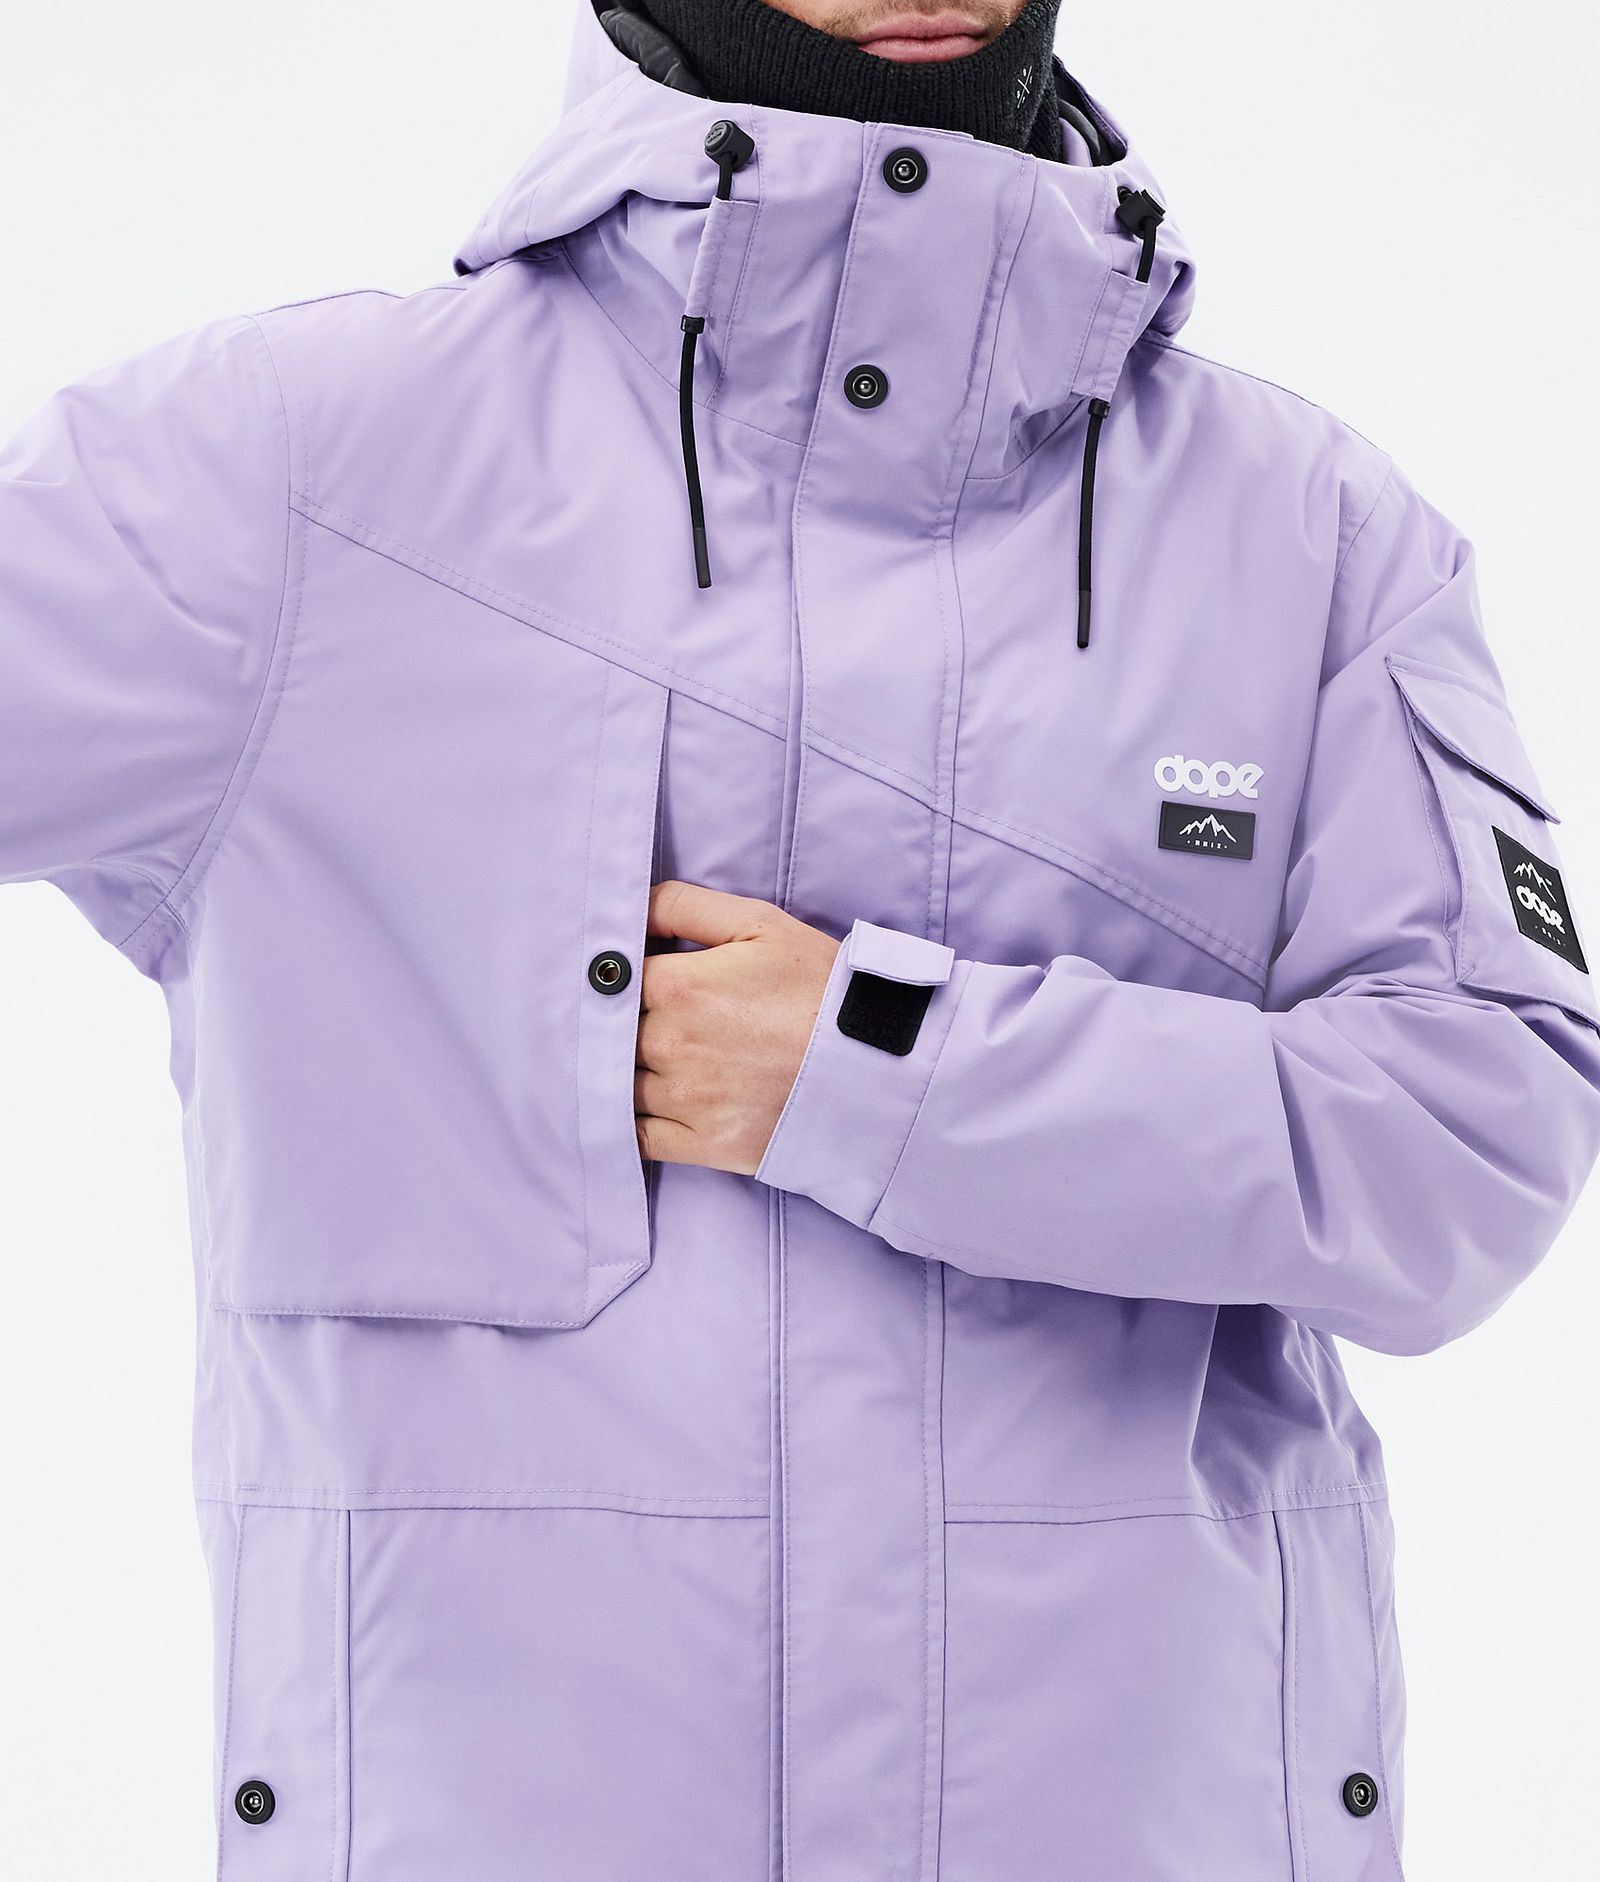 Dope Adept Giacca Snowboard Uomo Faded Violet Renewed, Immagine 8 di 9